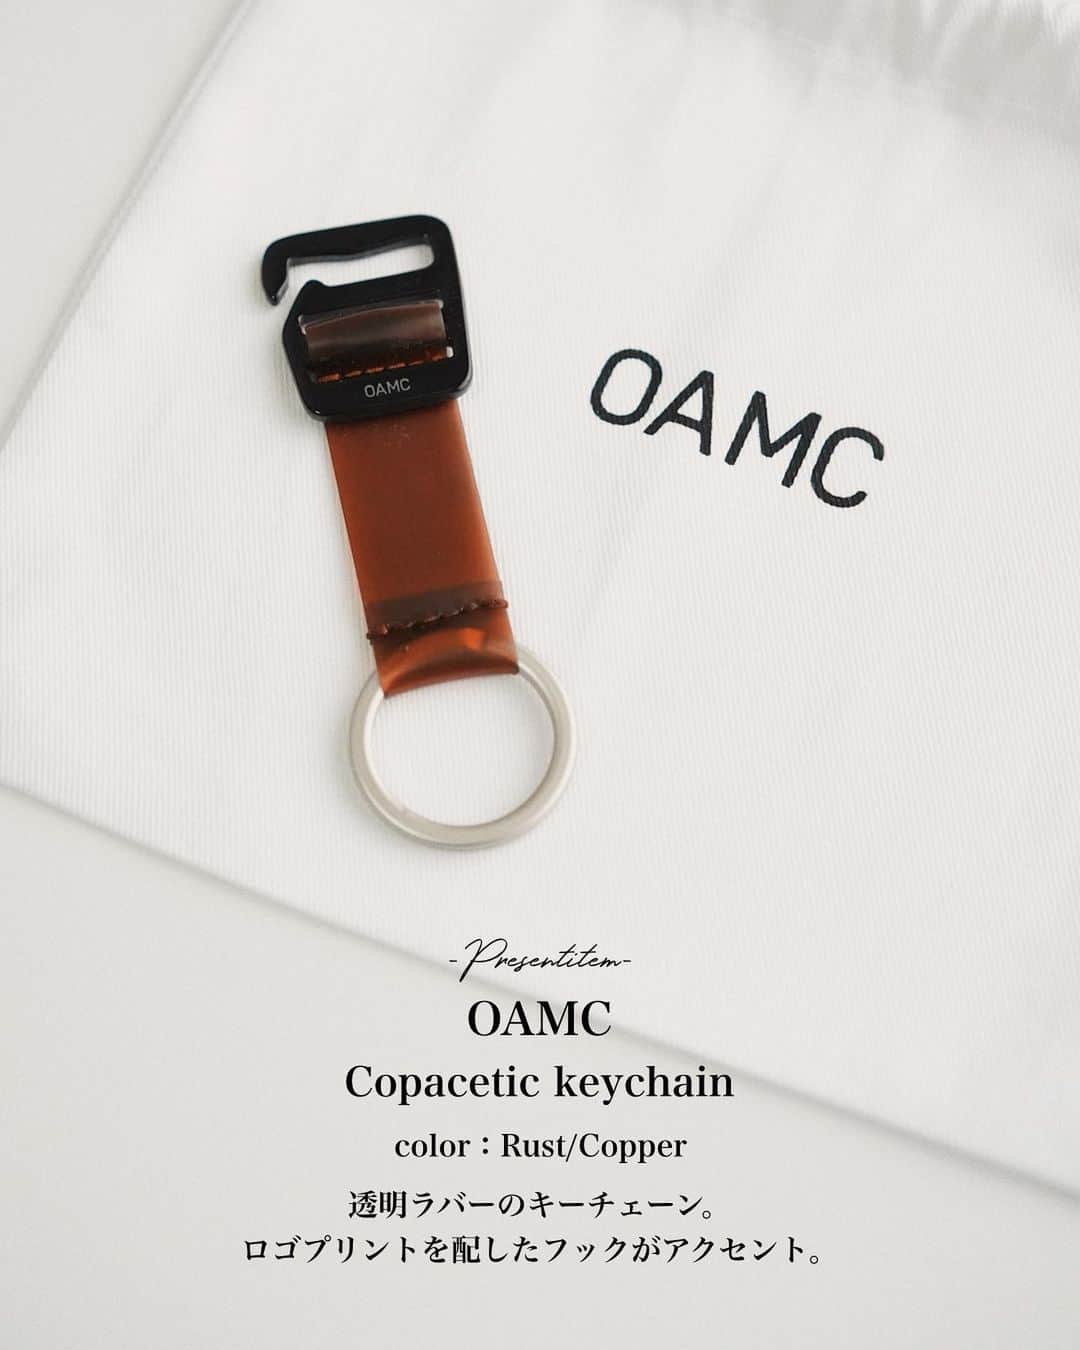 Ryoさんのインスタグラム写真 - (RyoInstagram)「ㅤㅤㅤㅤㅤㅤㅤㅤㅤㅤㅤㅤㅤ -プレゼントキャンペーン- ㅤㅤㅤㅤㅤㅤㅤㅤㅤㅤㅤㅤㅤ <プレゼントアイテム > OAMC Copacetic keychain×１名  ㅤㅤㅤㅤㅤㅤㅤㅤㅤㅤㅤㅤㅤ < 応募方法 > ① @ryo__takashima をフォロー ② この投稿を"いいね"と"保存" ③ この投稿に何でもいいのでコメントを！🙏 ㅤㅤㅤㅤㅤㅤㅤㅤㅤㅤㅤㅤㅤ ☆ストーリーズで拡散していただけると当選確率up! → この投稿画像の左下にある紙飛行機のアイコンを クリックして"ストーリーズに投稿を追加"  ㅤㅤㅤㅤㅤㅤㅤㅤㅤㅤㅤㅤ < 応募期間 > 10/19(土) 21:00 ~ 10/26(土) 23:59 ㅤㅤㅤㅤㅤㅤㅤㅤㅤㅤㅤ < 当選発表 > 10/27(日)にストーリーズにて当選者発表を行います。  ㅤㅤㅤㅤㅤㅤㅤㅤㅤㅤㅤㅤㅤ 沢山のご応募お待ちしております！ ㅤㅤㅤㅤㅤㅤㅤㅤㅤㅤㅤㅤㅤ ____________________________ㅤㅤㅤㅤㅤㅤㅤㅤㅤㅤㅤㅤㅤ -Present campaign-  ㅤㅤㅤㅤㅤㅤㅤㅤㅤㅤㅤㅤㅤ <Present item>  OAMC Copacetic keychain x 1  ㅤㅤㅤㅤㅤㅤㅤㅤㅤㅤㅤㅤㅤ <How to apply>  ① Follow @ryo__takashima  ② Like and save this post  ③ Comment on this post  ㅤㅤㅤㅤㅤㅤㅤㅤㅤㅤㅤㅤㅤ ☆ Winning probability increases if you spread in Stories! → Click the paper airplane icon at the bottom left of this post image.  Click "Add Post to Stories"  ㅤ ㅤ ㅤ ㅤ ㅤ ㅤ ㅤ ㅤ ㅤ ㅤ ㅤ ㅤ ㅤㅤㅤㅤㅤㅤㅤㅤㅤㅤㅤㅤㅤ <Application period>  10/19 (Sat) 21:00 ~ 10/26 (Sat) 23:59  ㅤ ㅤ ㅤ ㅤ ㅤ ㅤ ㅤ ㅤ ㅤ ㅤ ㅤ  ㅤㅤㅤㅤㅤㅤㅤㅤㅤㅤㅤㅤㅤ <Winning announcement>  Winners will be announced at Stories on 10/27 (Sun). ㅤ ㅤ ㅤ ㅤ ㅤ ㅤ ㅤ ㅤ ㅤ ㅤ ㅤ ㅤ ㅤ  We look forward to many applications!  #oamc #プレゼントキャンペーン  #プレゼント企画」10月19日 21時01分 - ryo__takashima